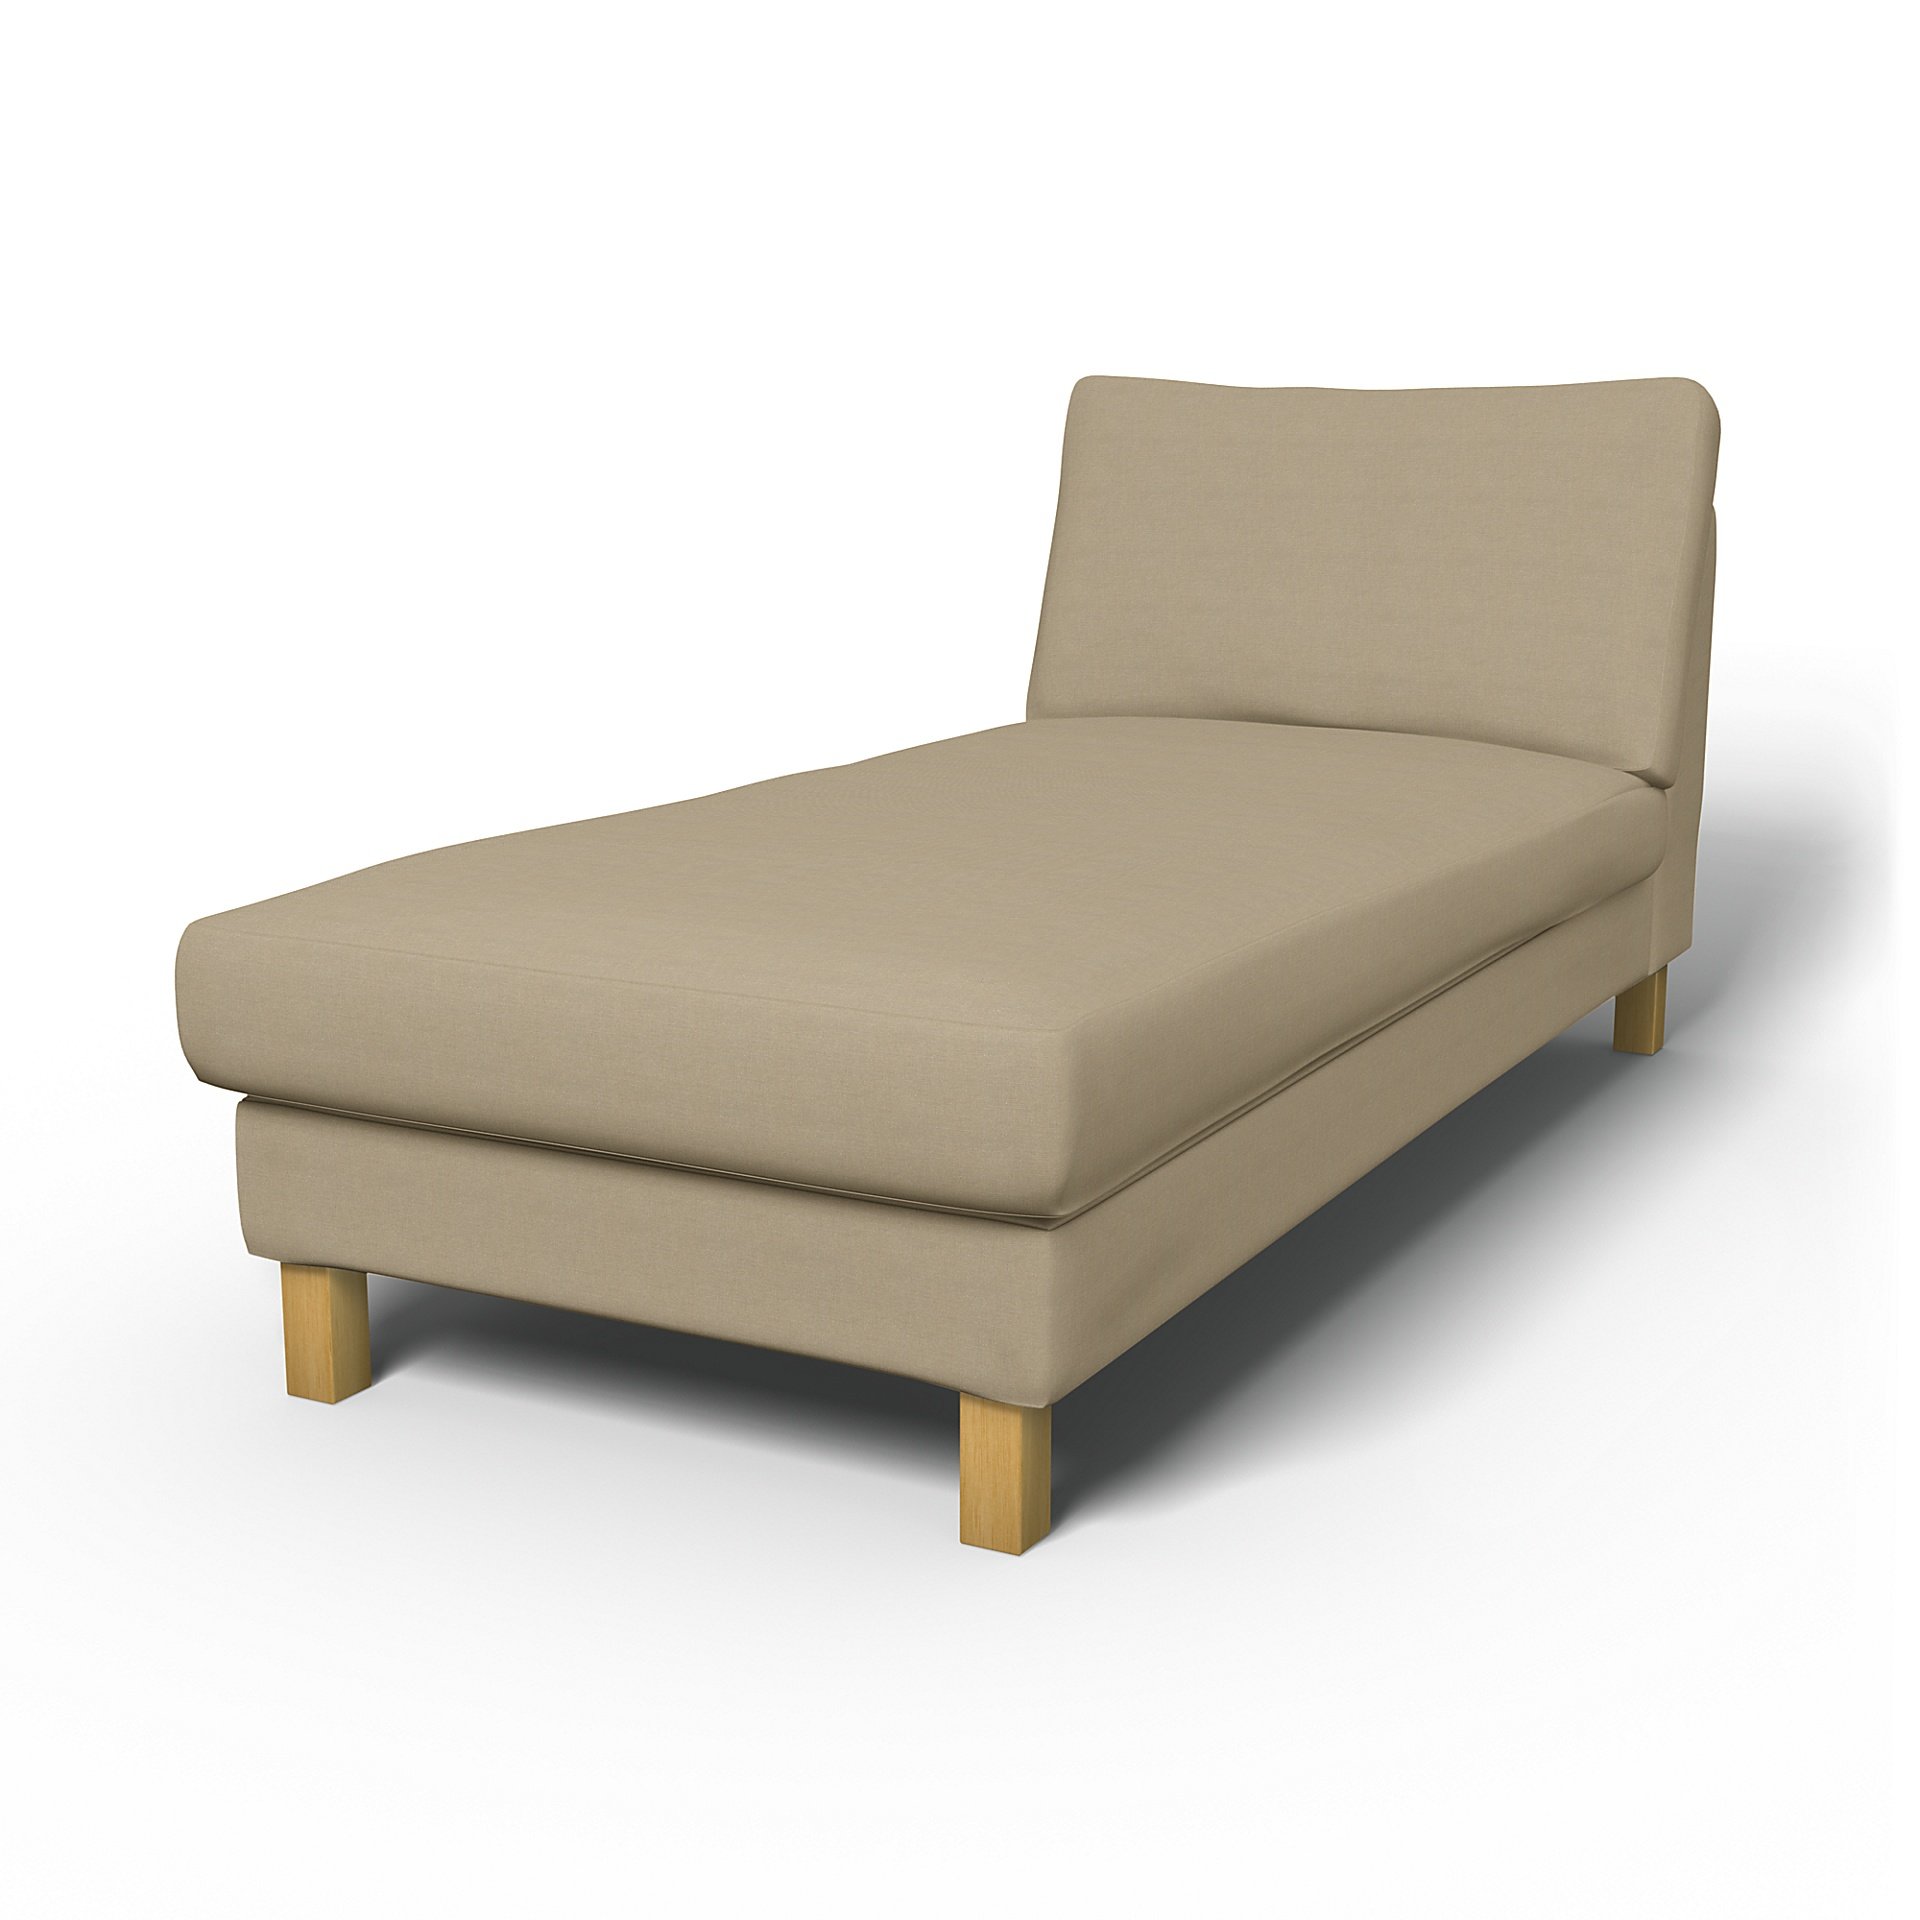 IKEA - Karlstad Stand Alone Chaise Longue Cover, Tan, Linen - Bemz